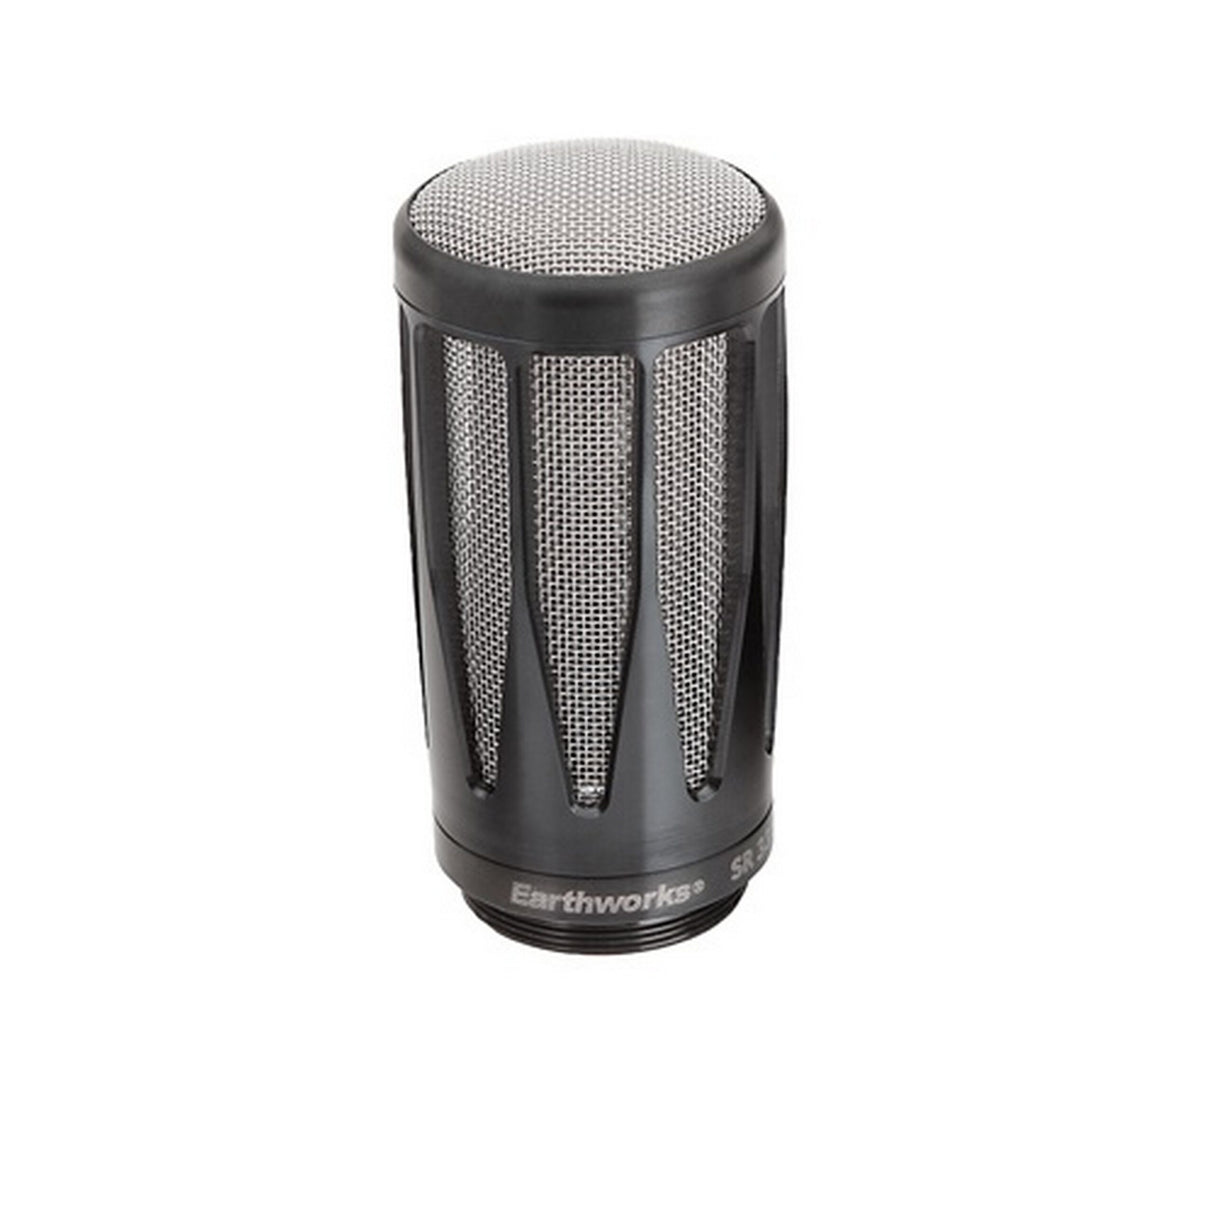 Earthworks SR3314-SB Cardioid Wireless Microphone Capsule, Black with Stainless Mesh